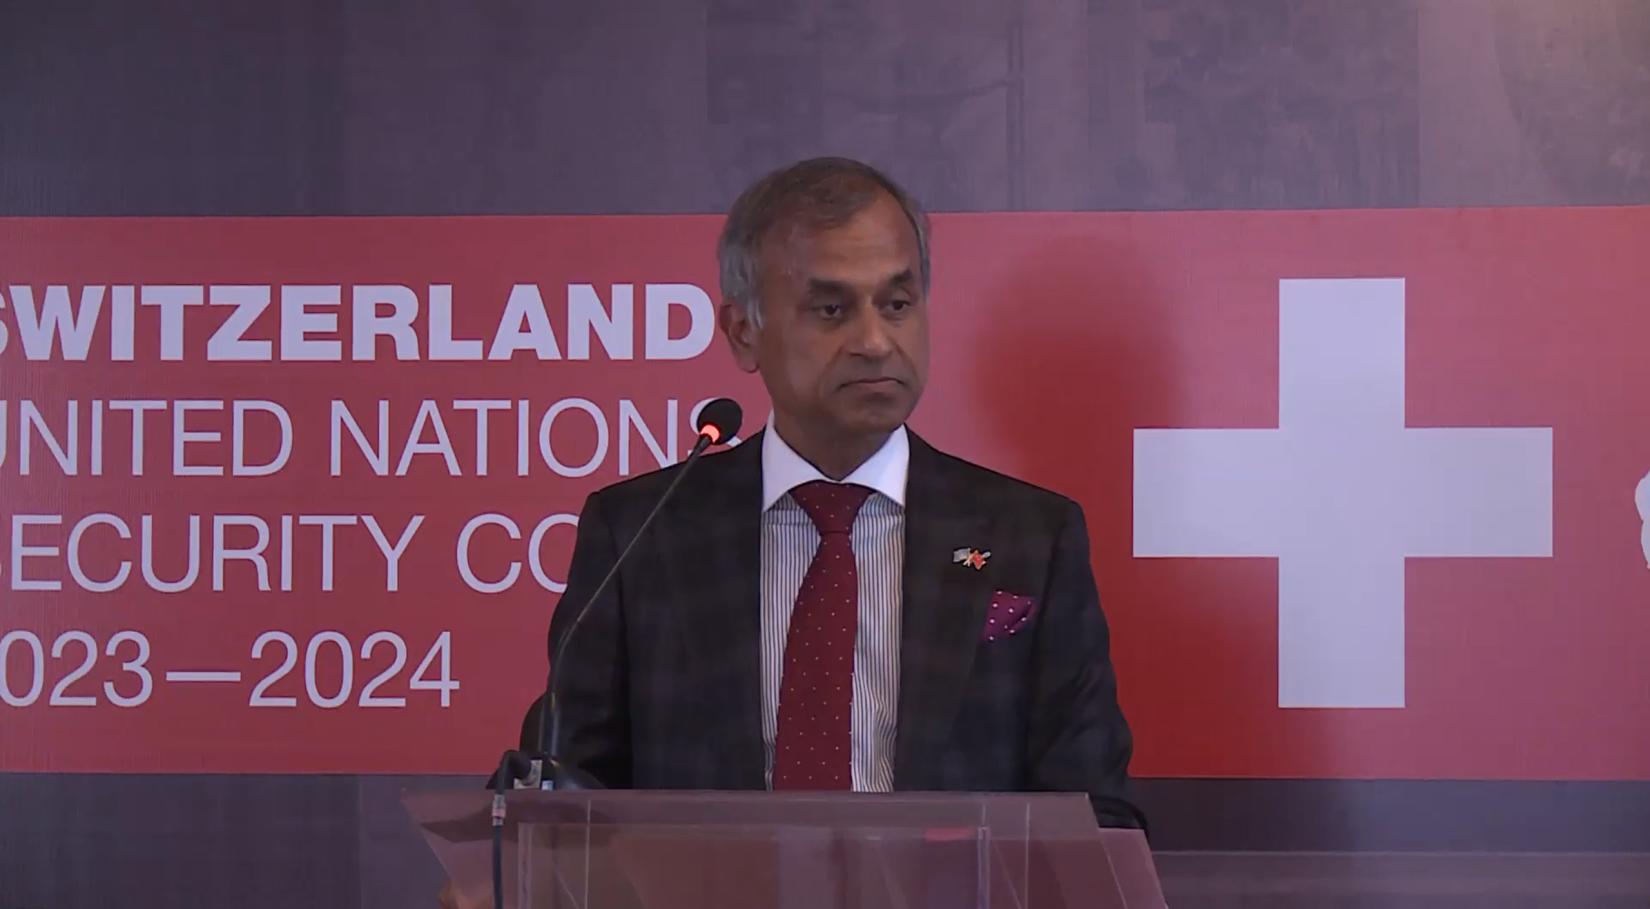 Siddharth Chatterjee, UN Resident Coordinator in China, speaking at the Embassy of Switzerland in the People’s Republic of China